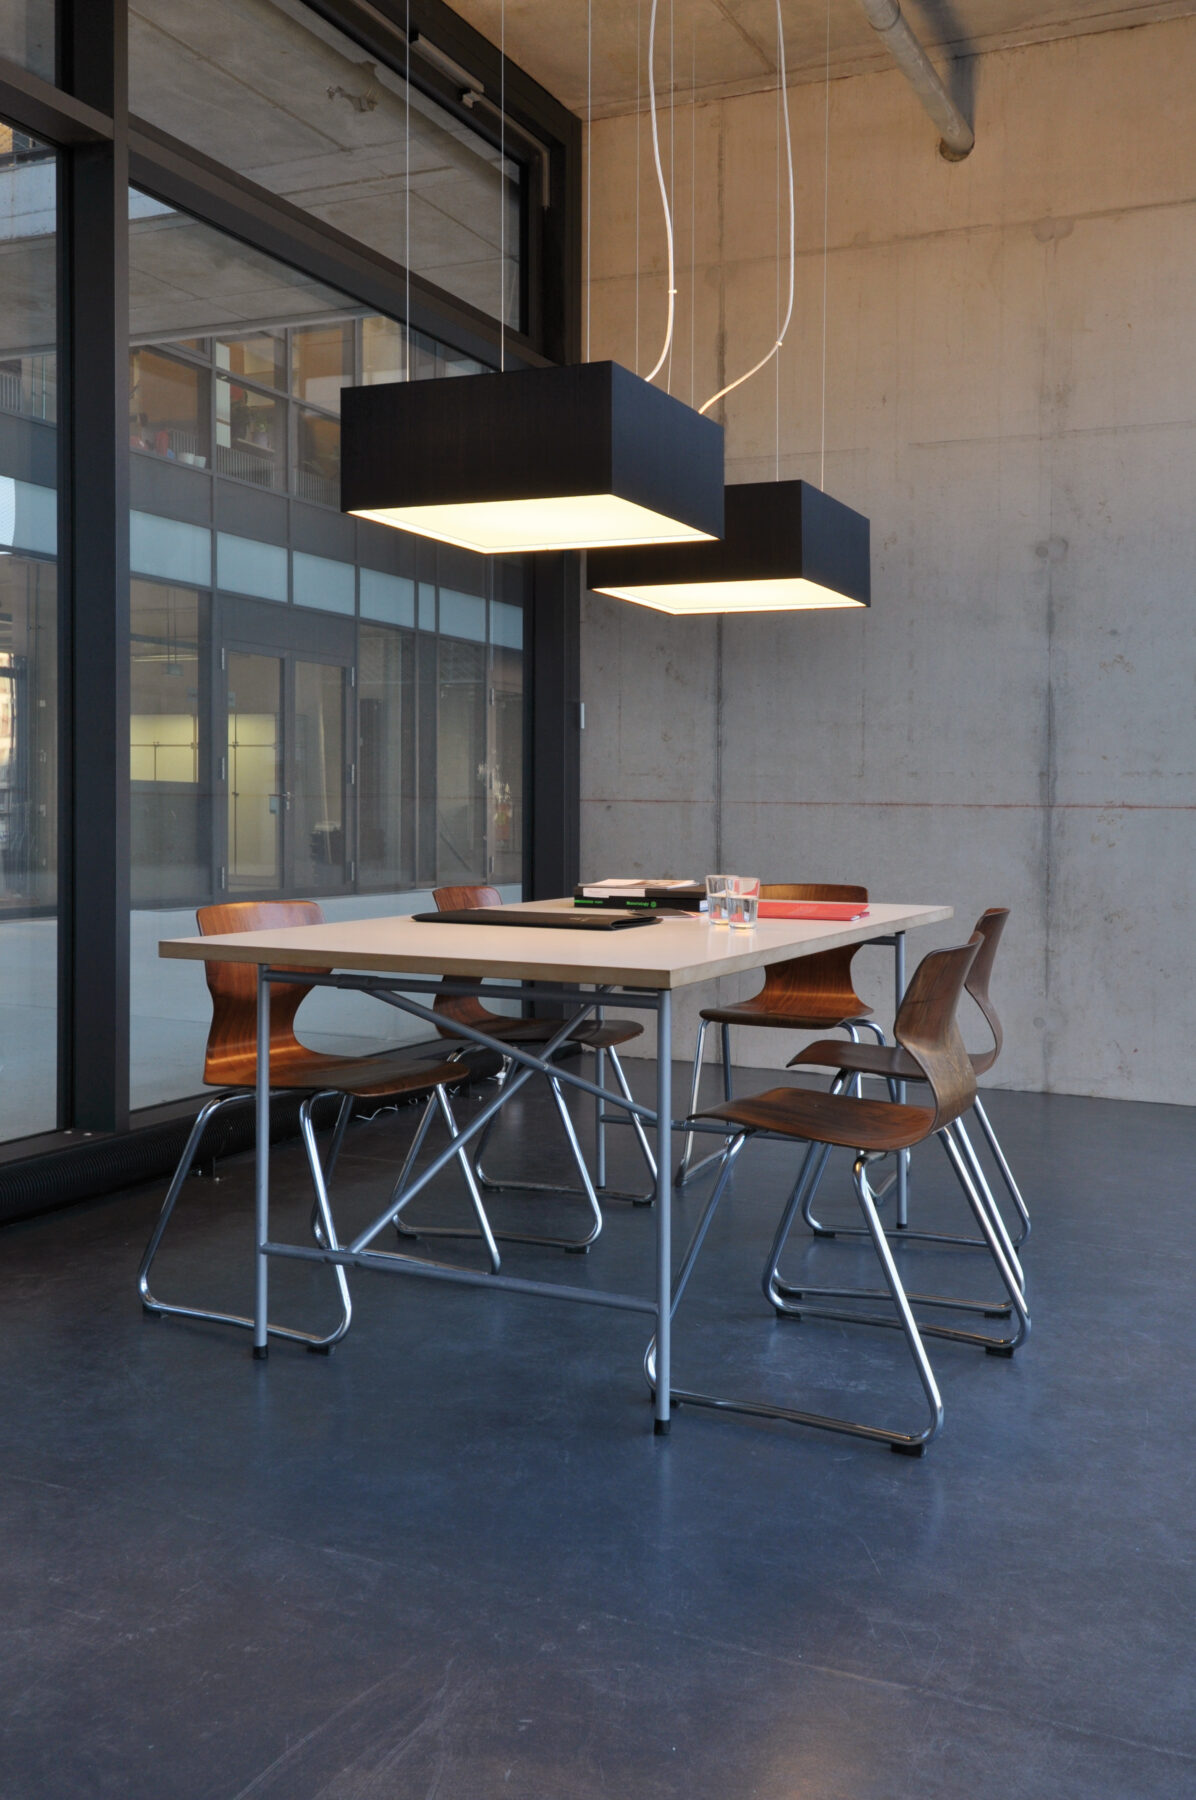 CUBIC FRAME pendant lights in black silk above a table a the creative studio.